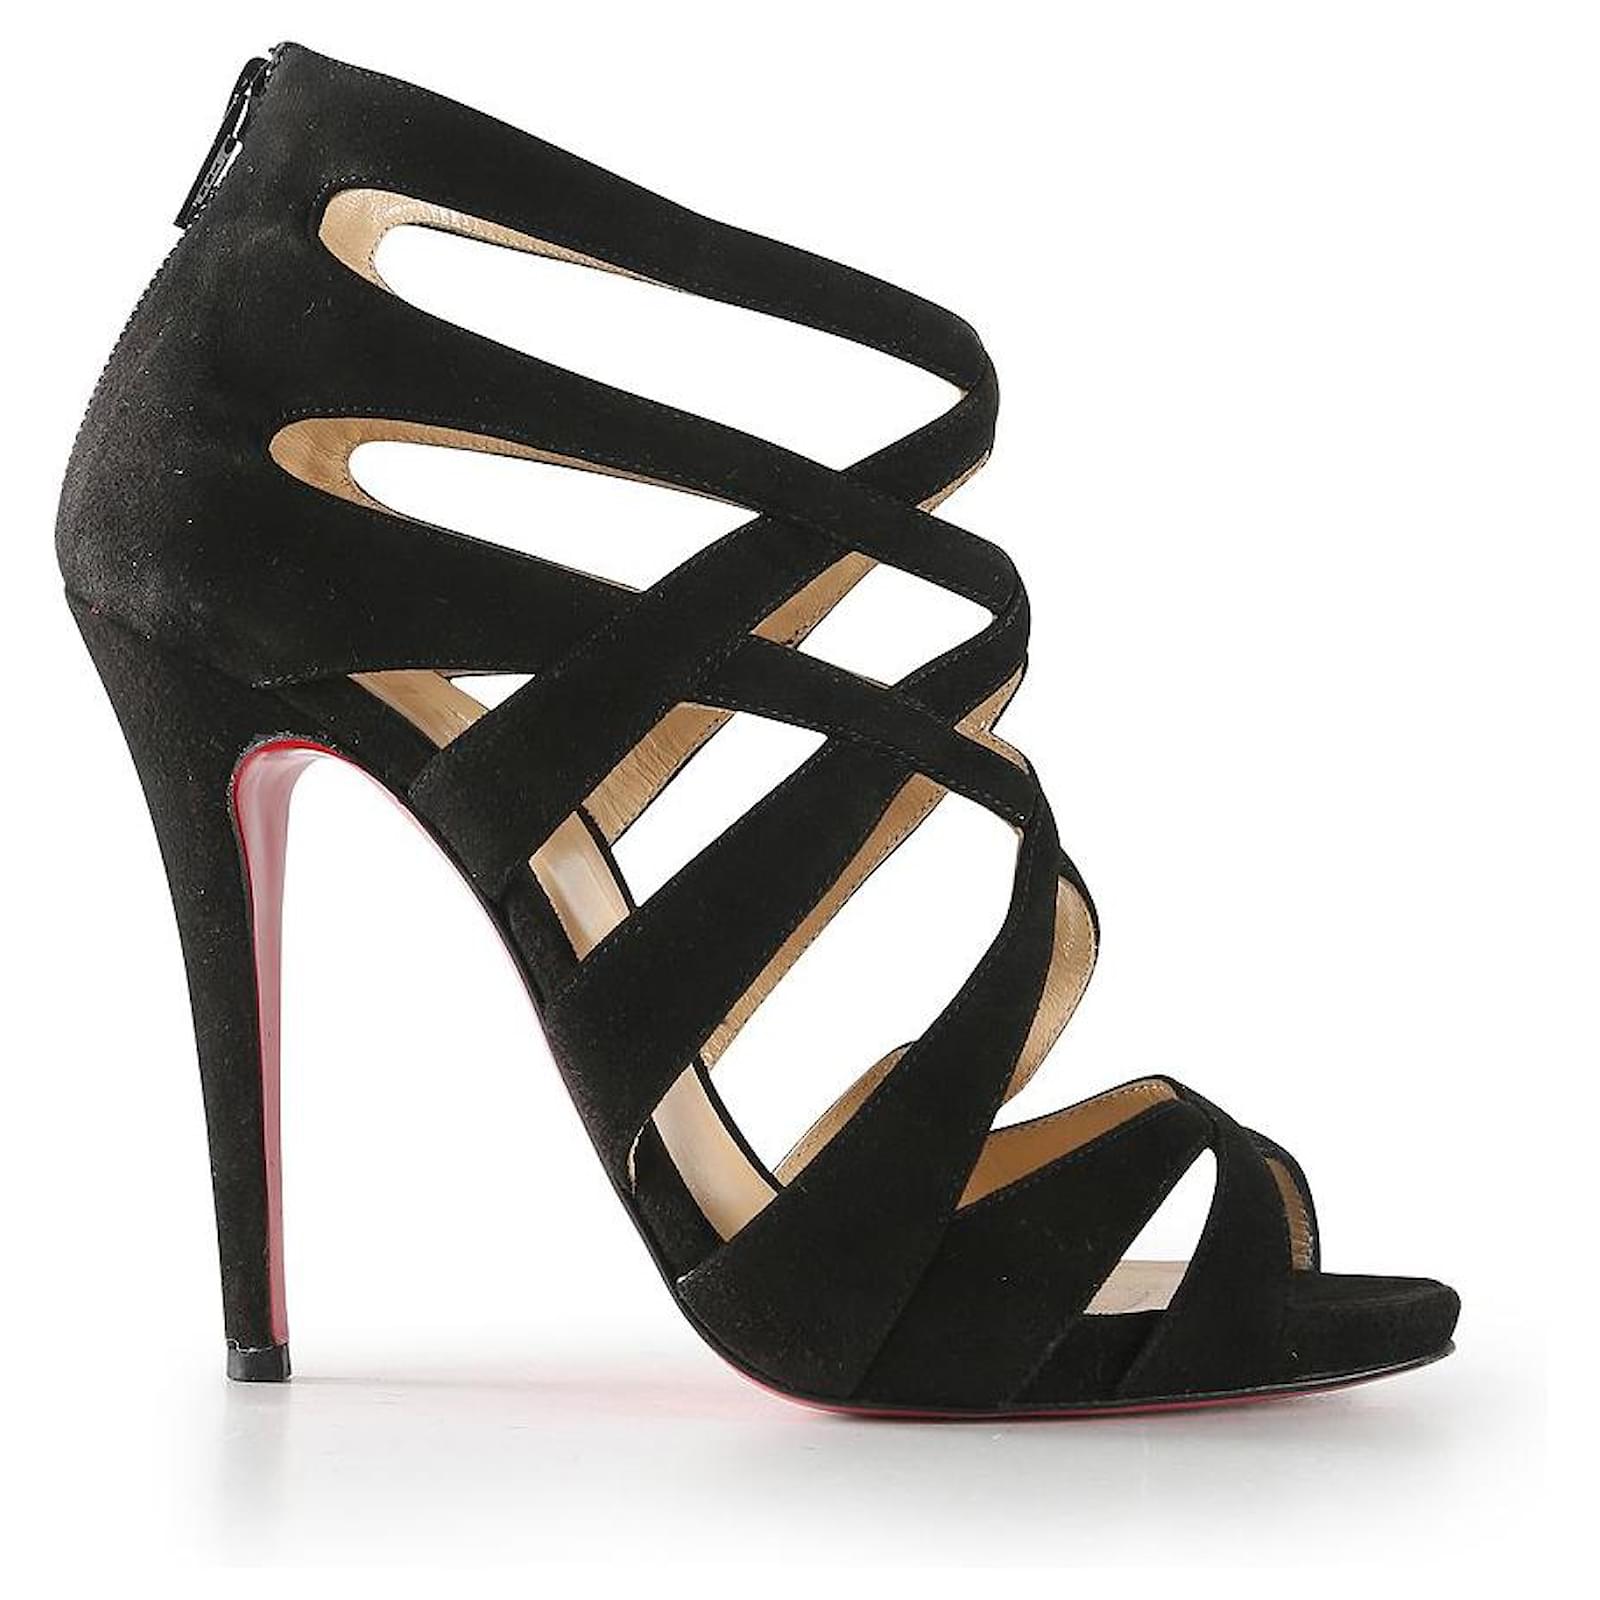 Christian Louboutin Heels & Wedges for Women sale - discounted price |  FASHIOLA INDIA